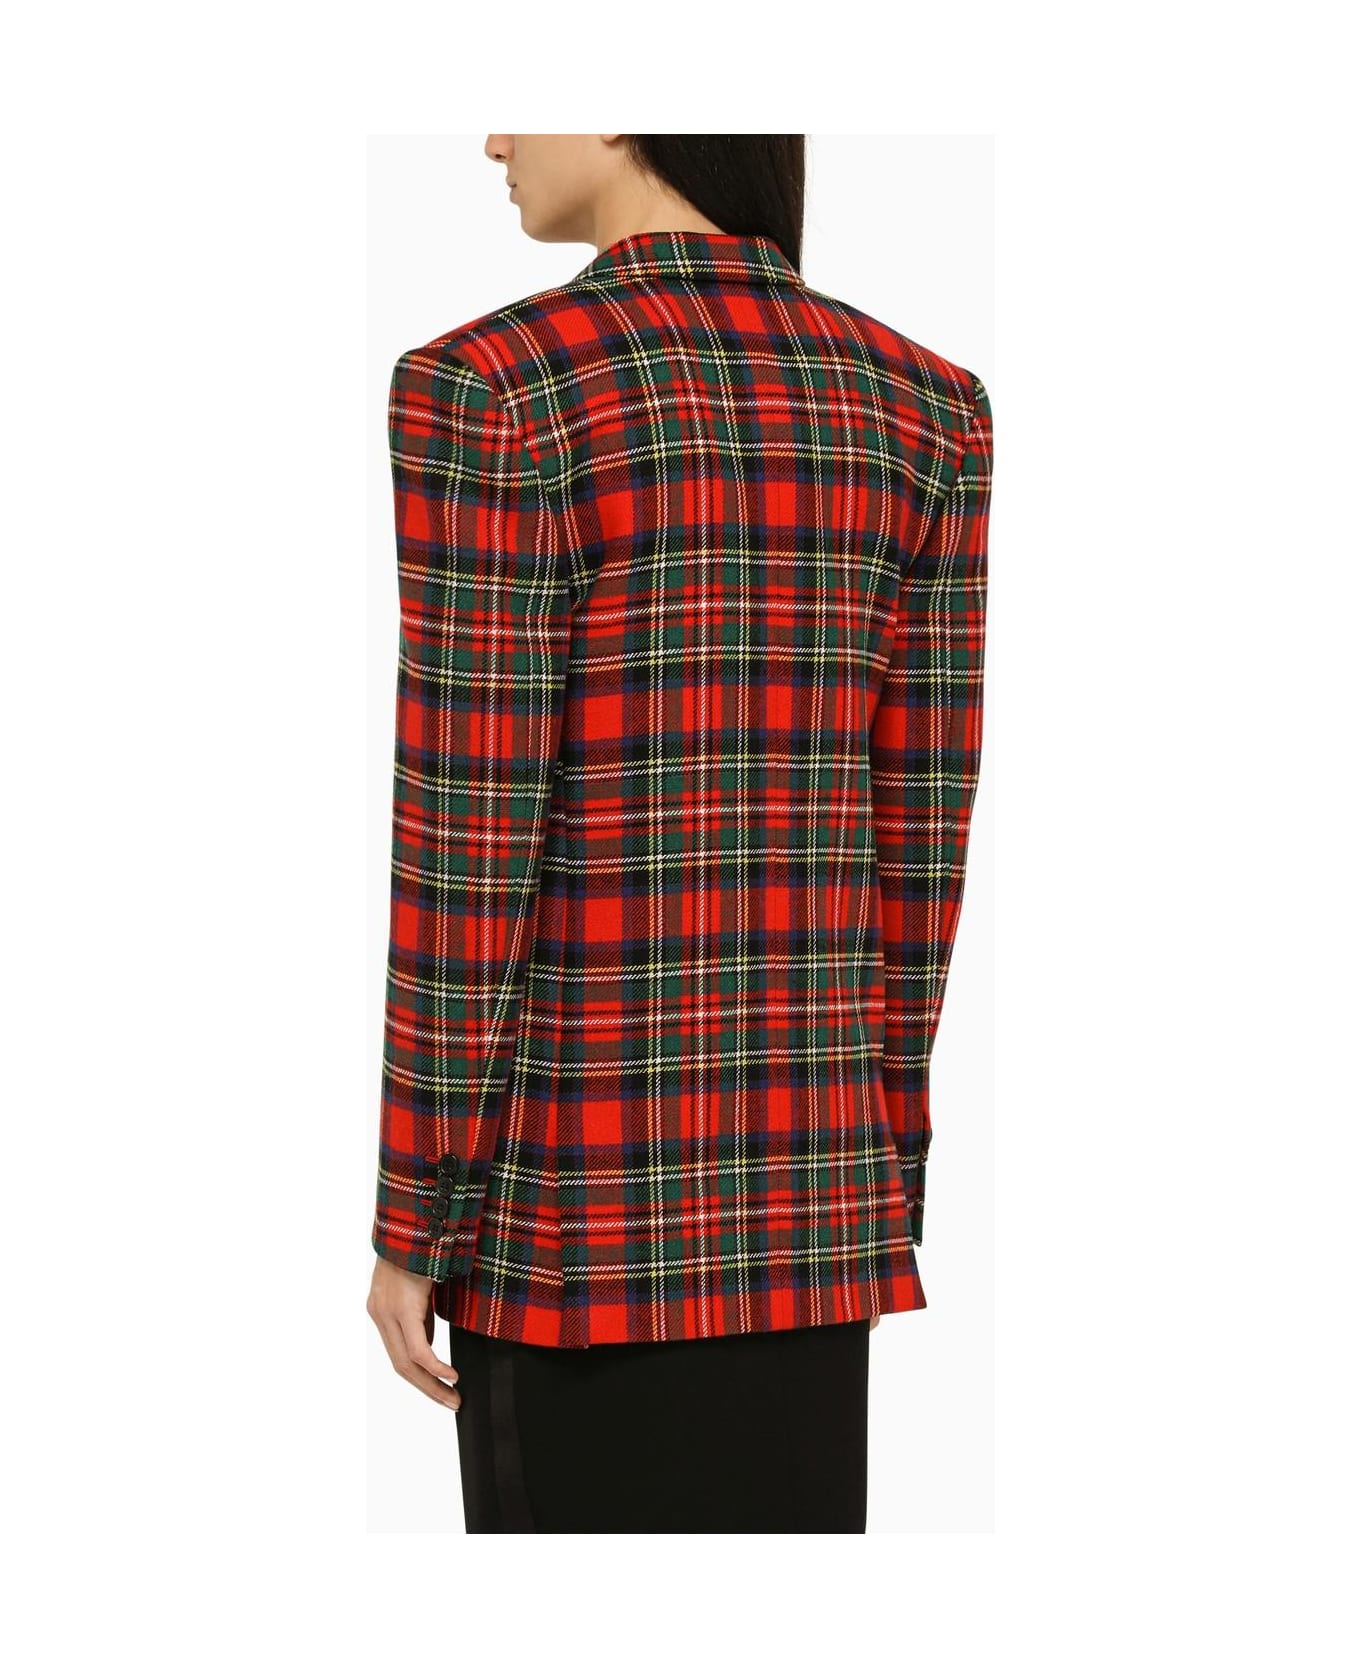 Saint Laurent Red Tartan Double-breasted Wool Jacket ブレザー